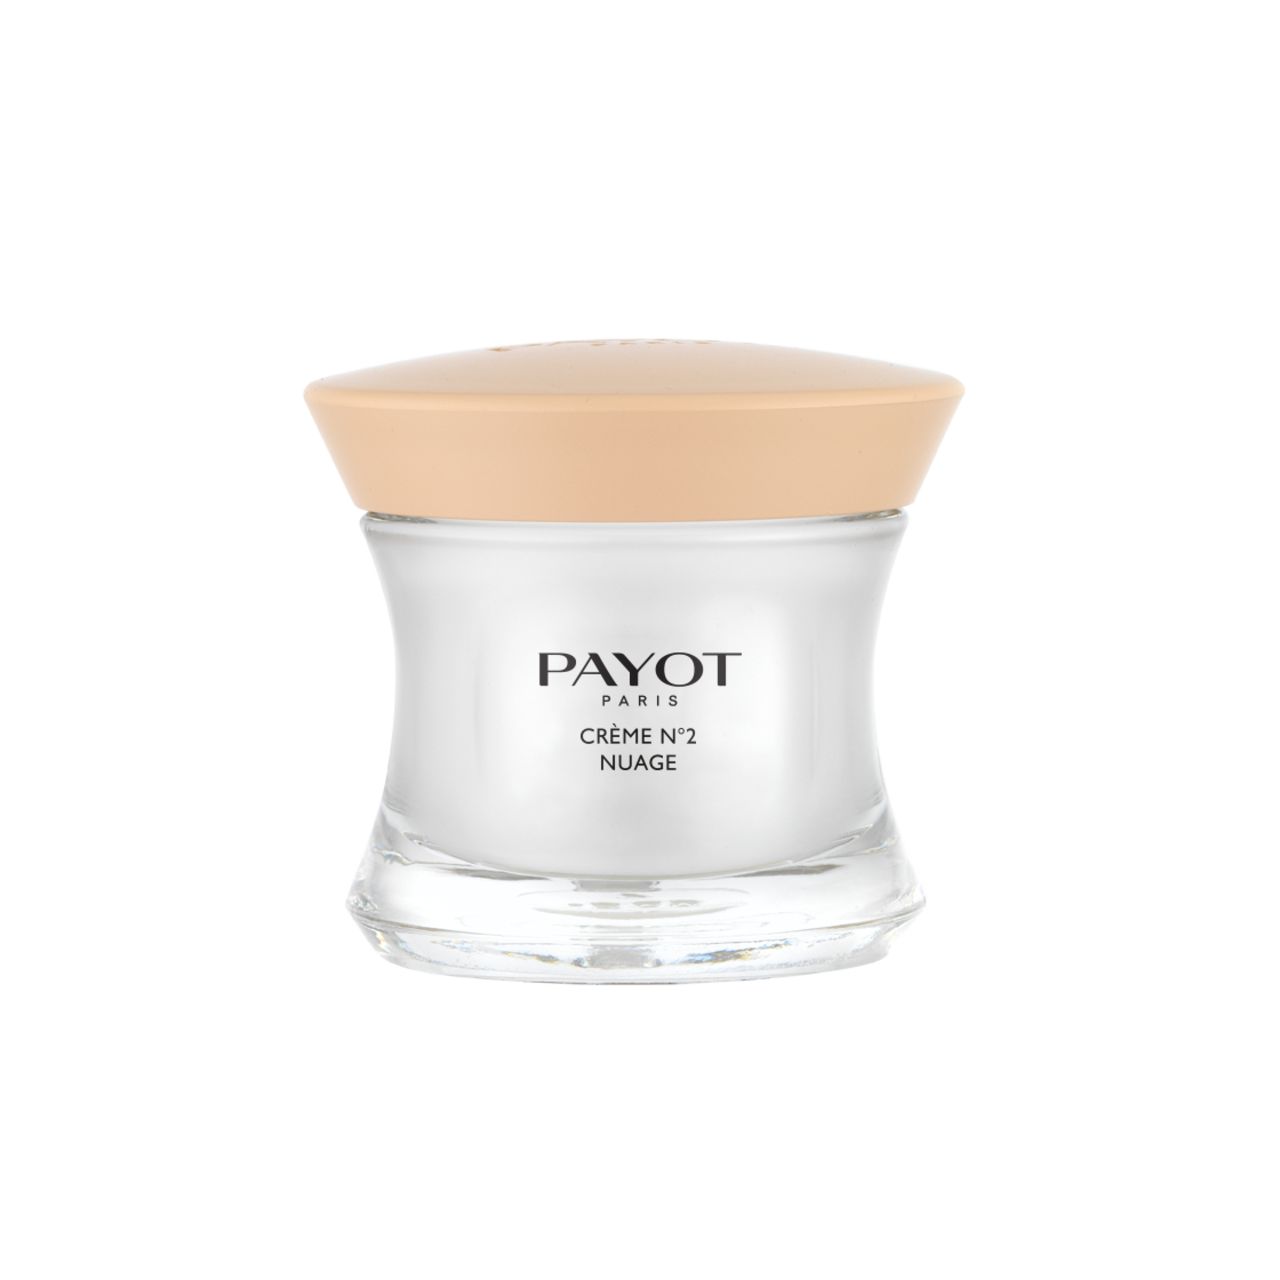 Payot, Creme N°2 Nuage